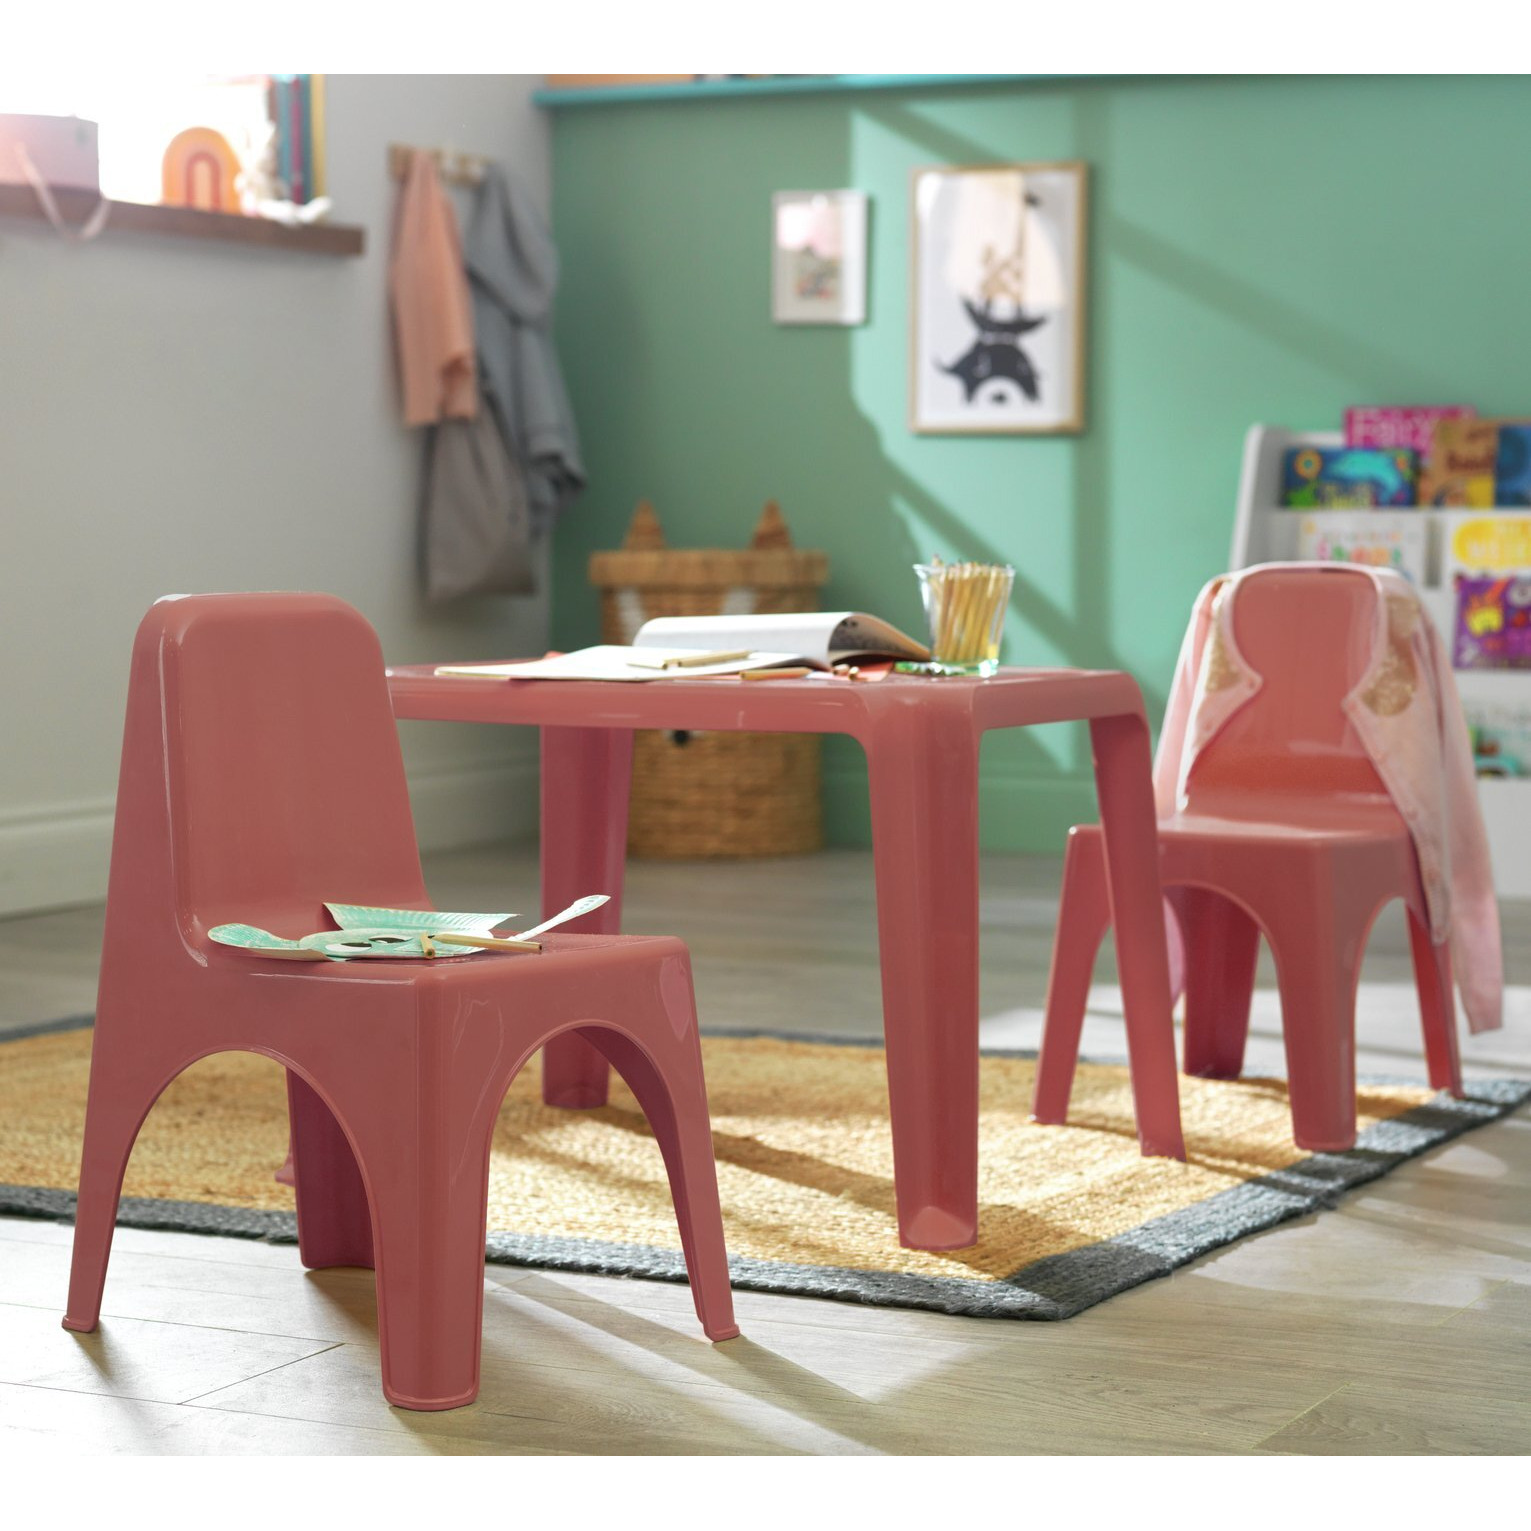 Bica Kids Set of 2 Red Plastic Chairs - image 1